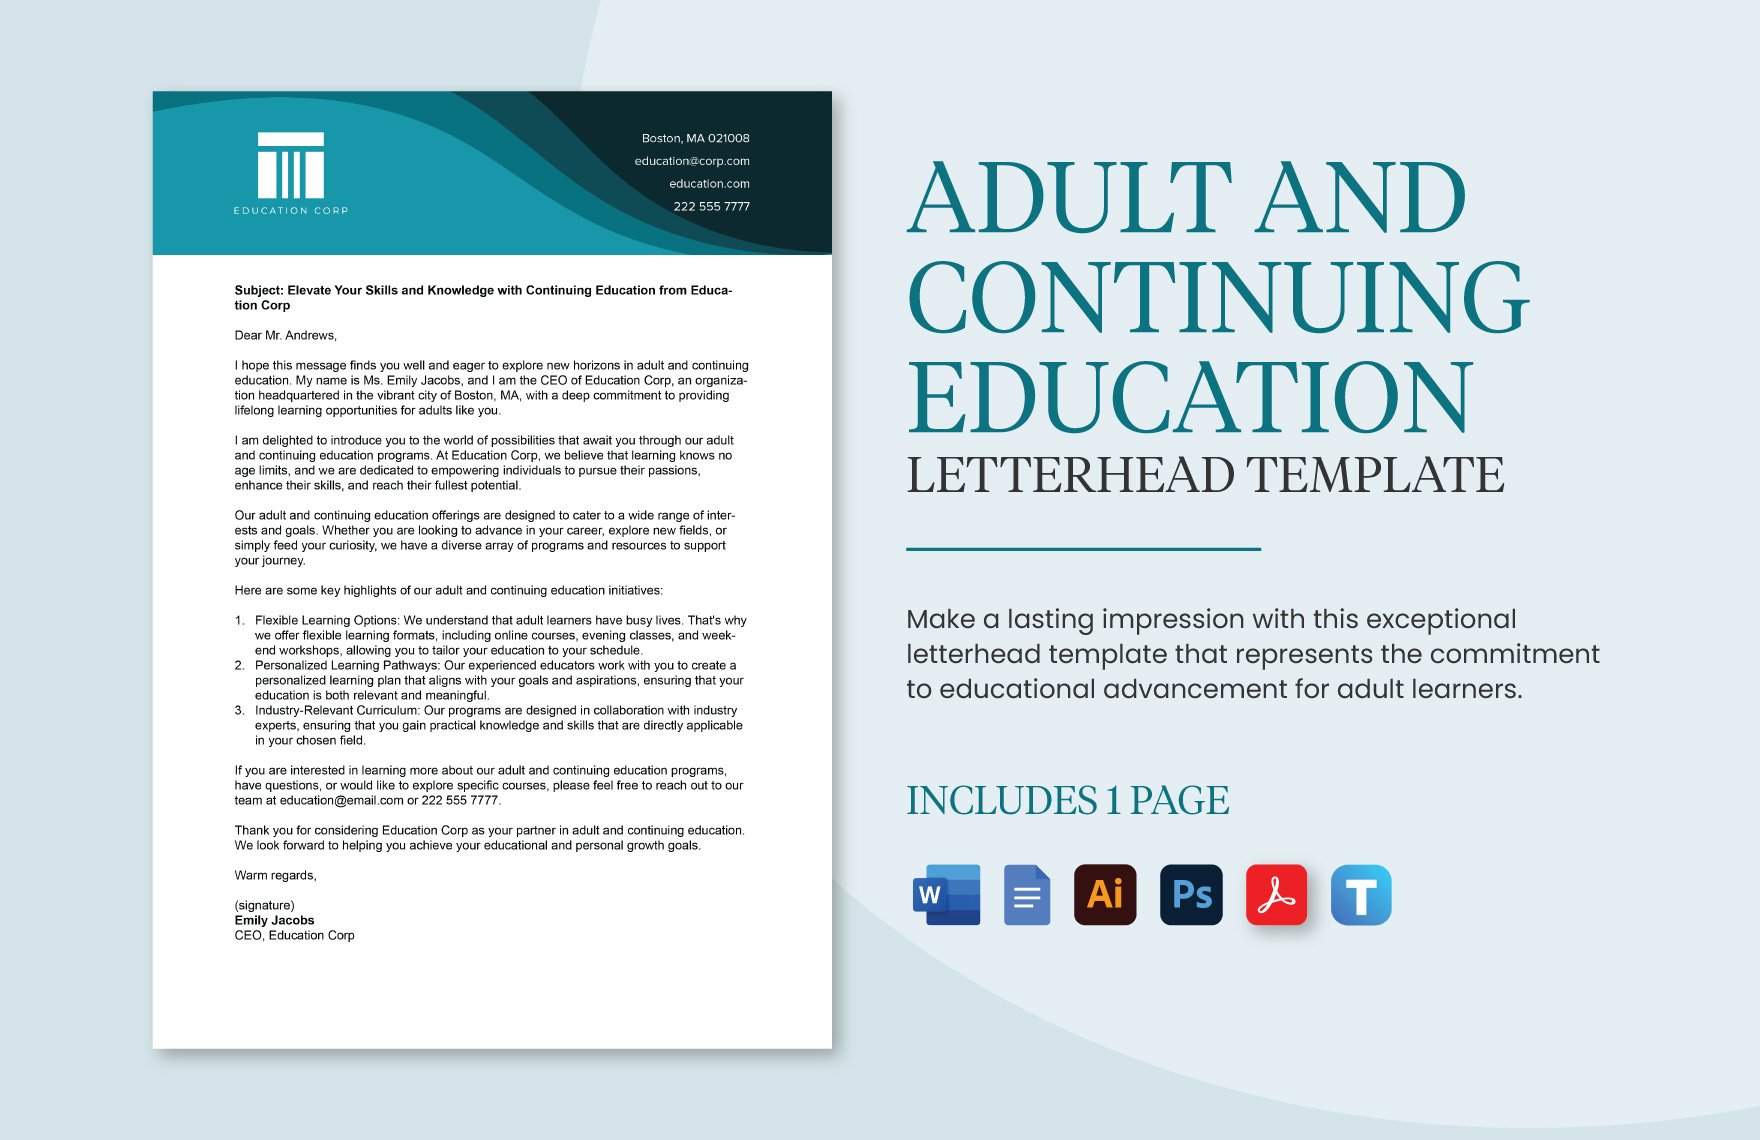 Adult and Continuing Education Letterhead Template